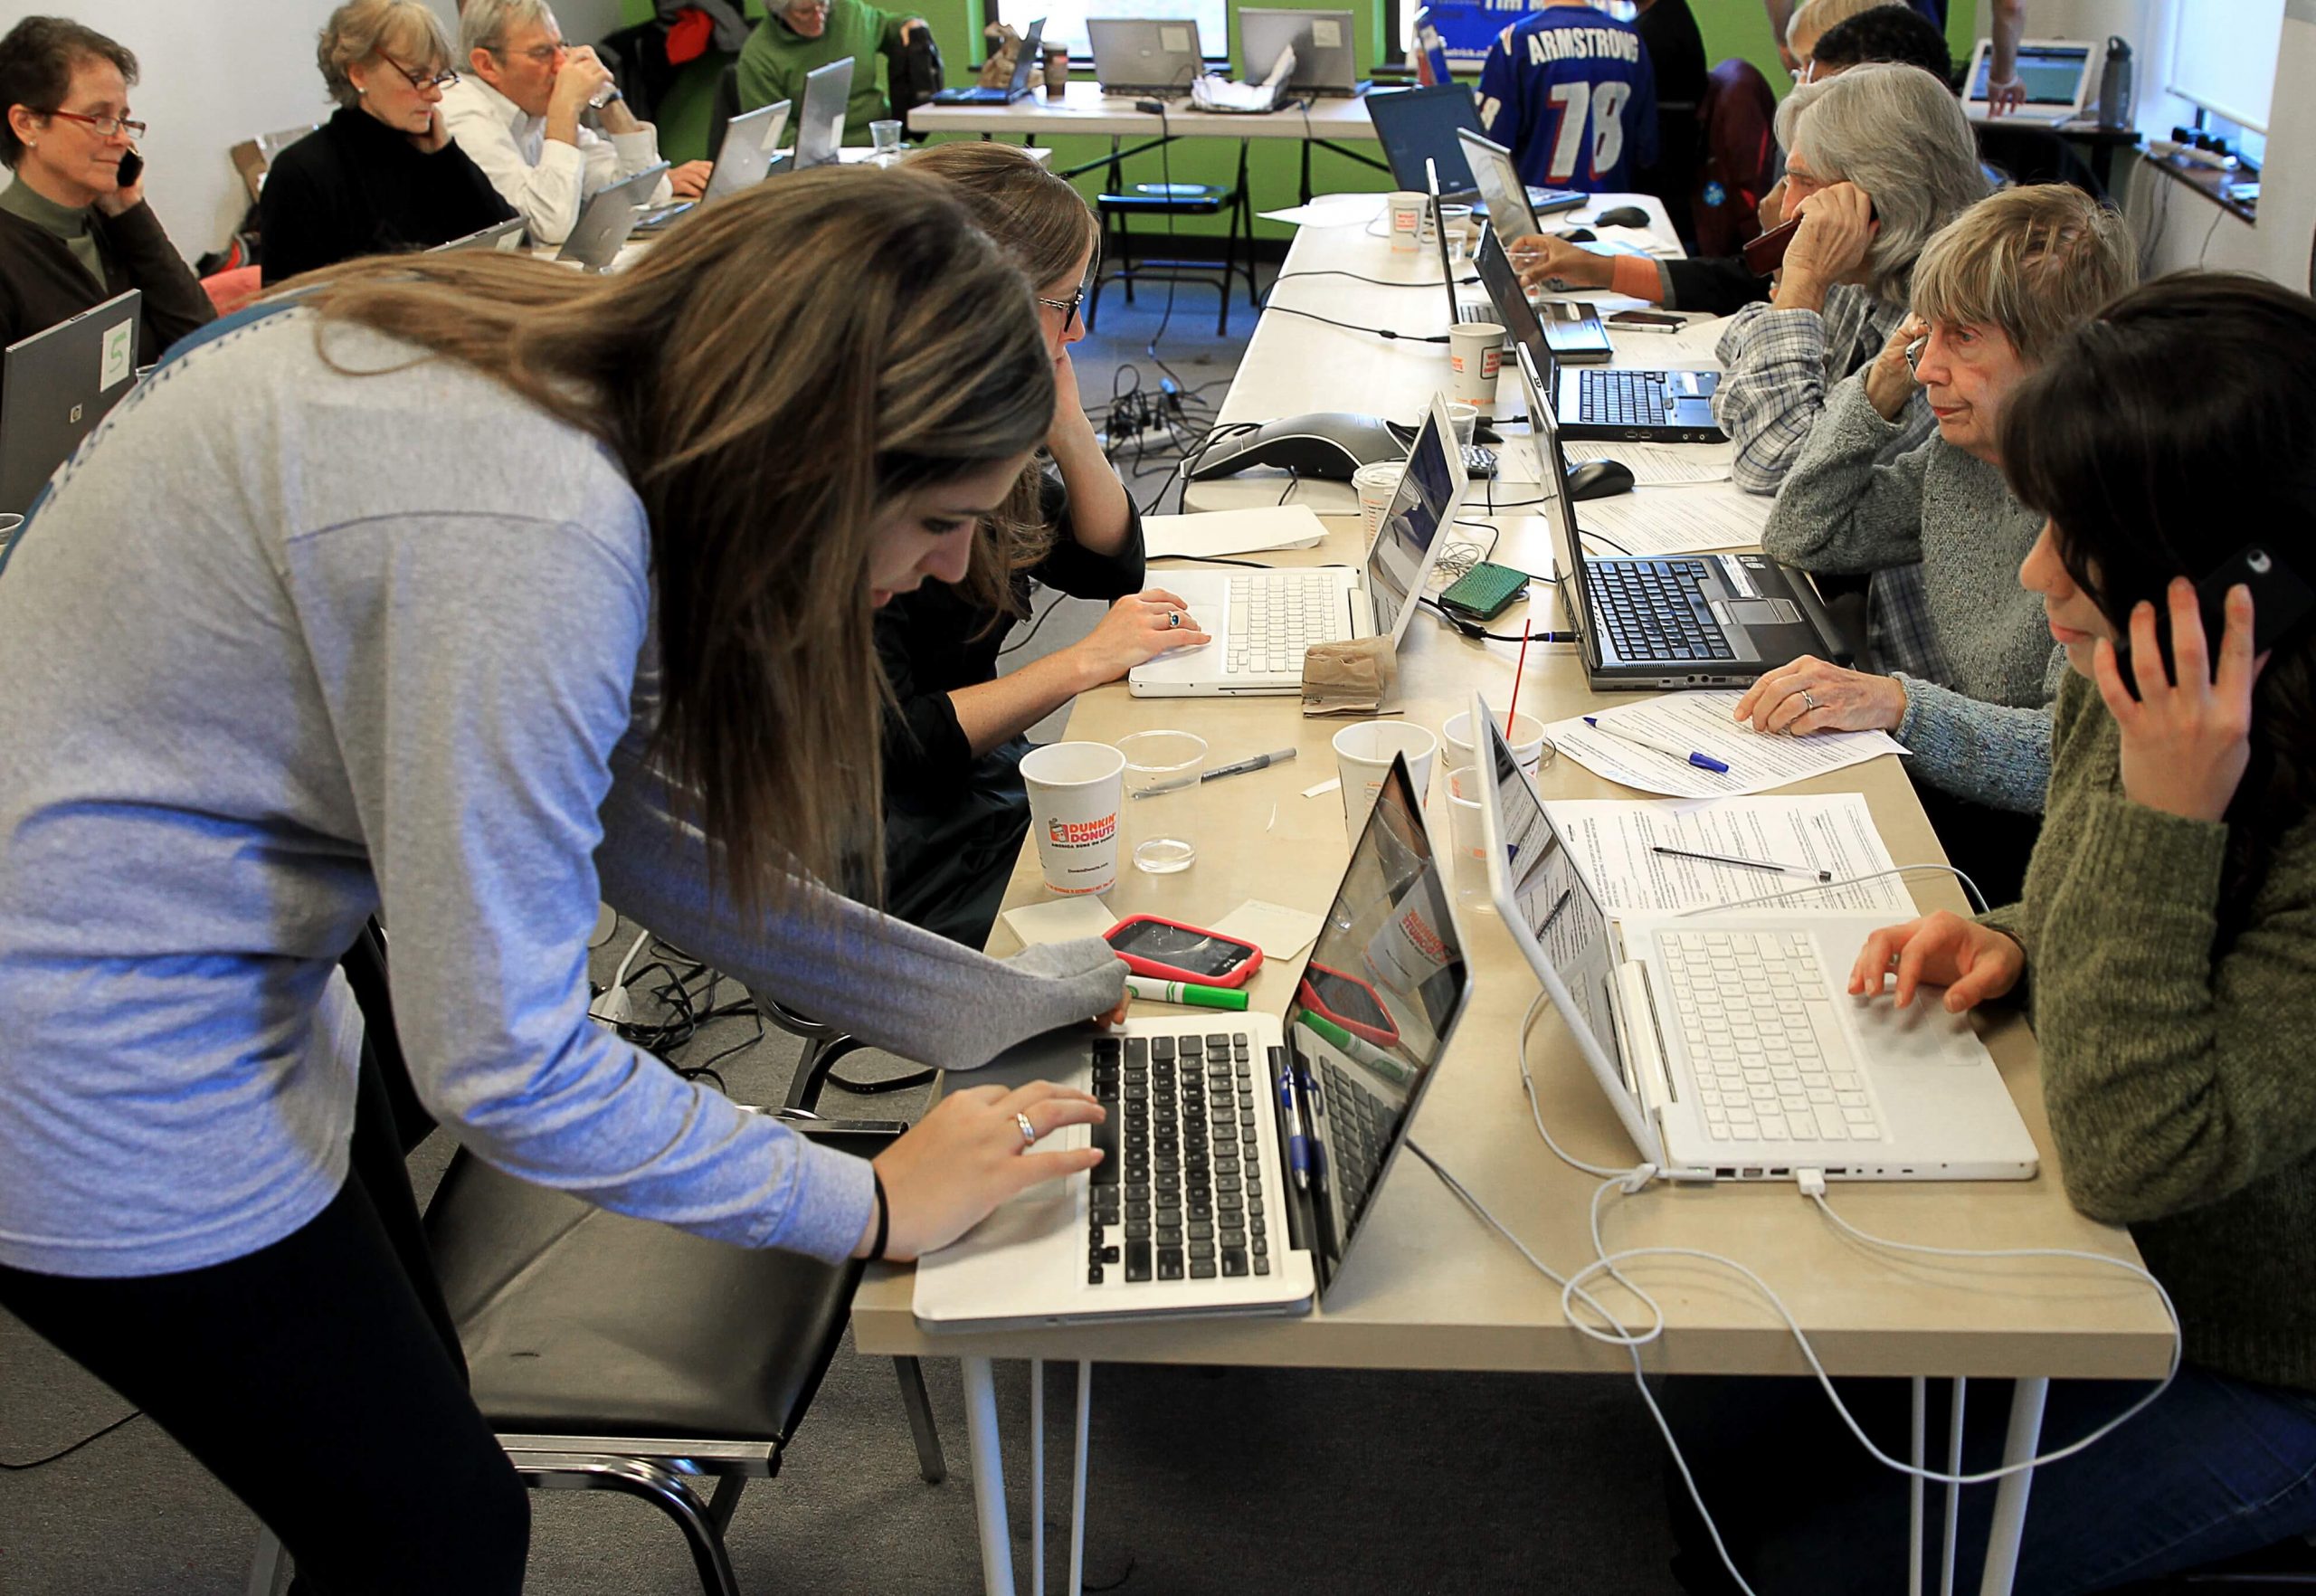 campaign staff working on laptops in a room